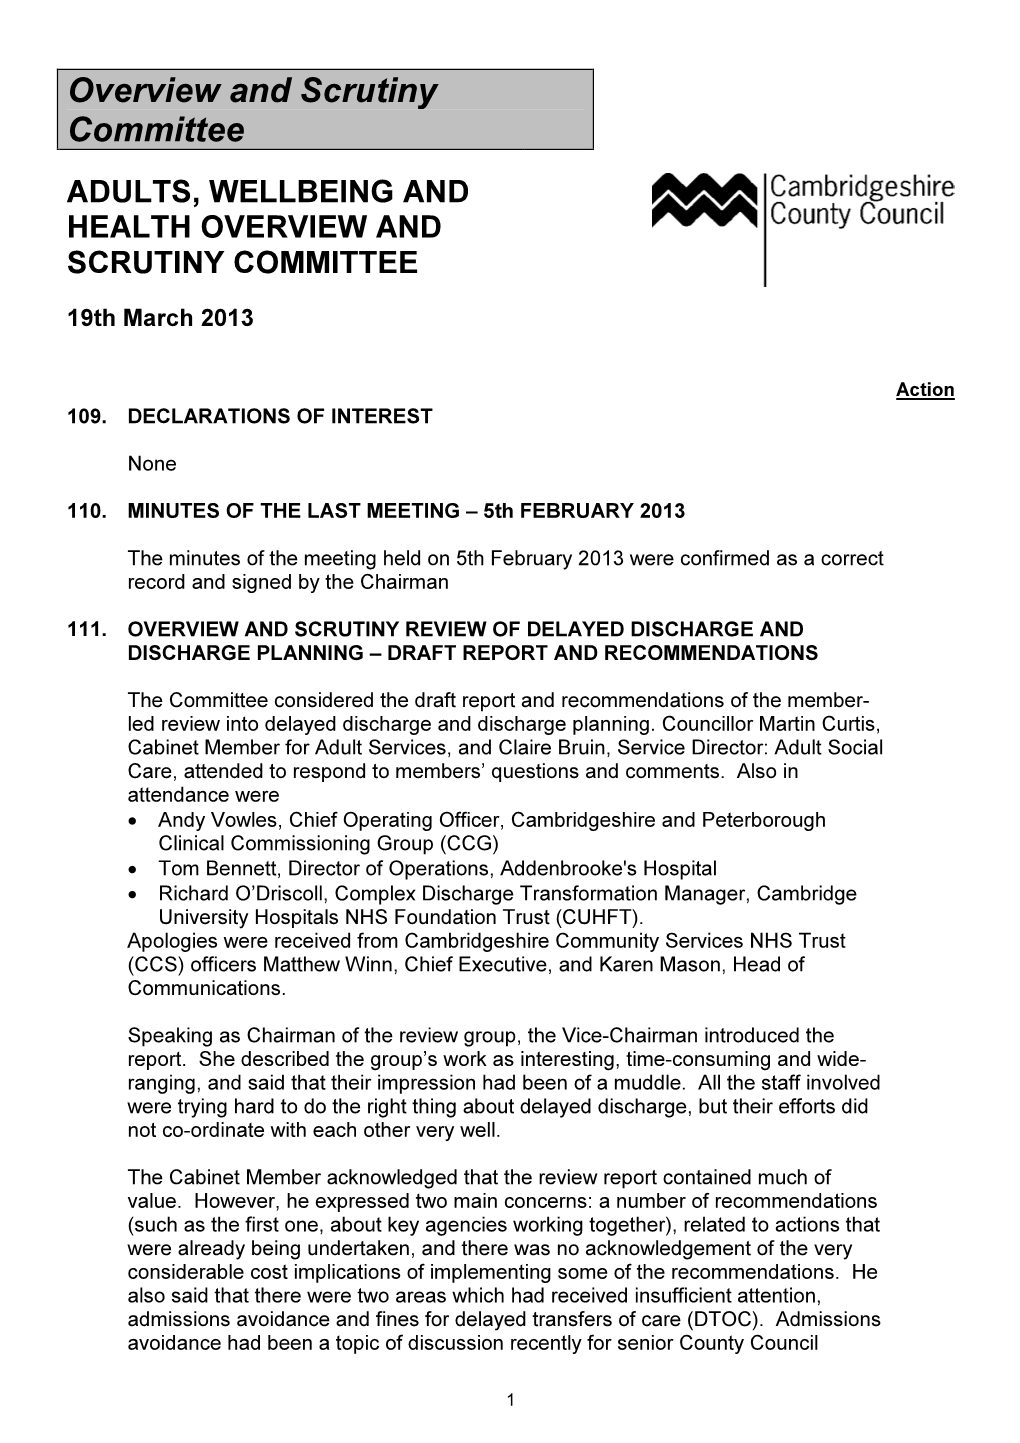 Overview and Scrutiny Committee